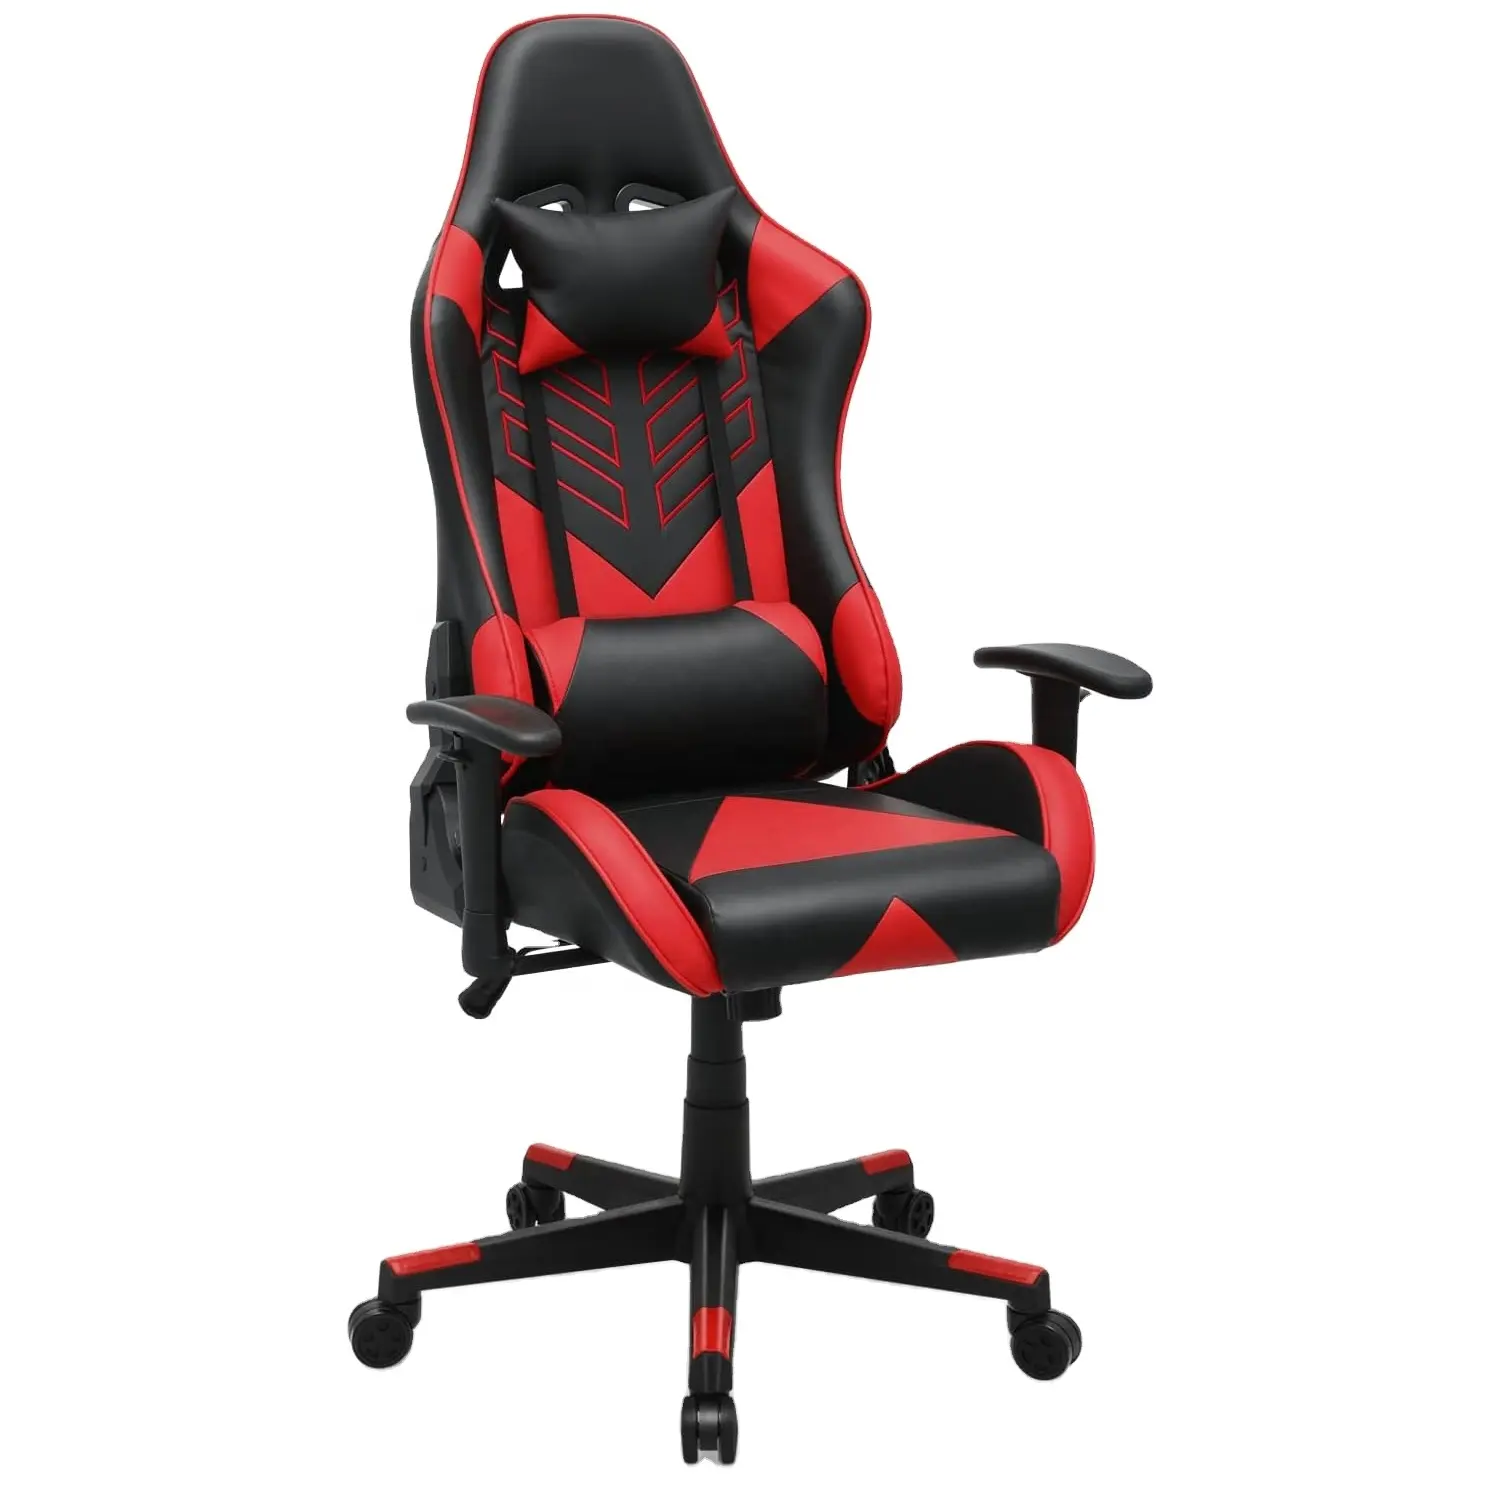 Rgb Gamer Chair Eco-Friendly Red Leather High Back Massage 2d Office Gaming Computer Chair with Headrest and Lumbar Support